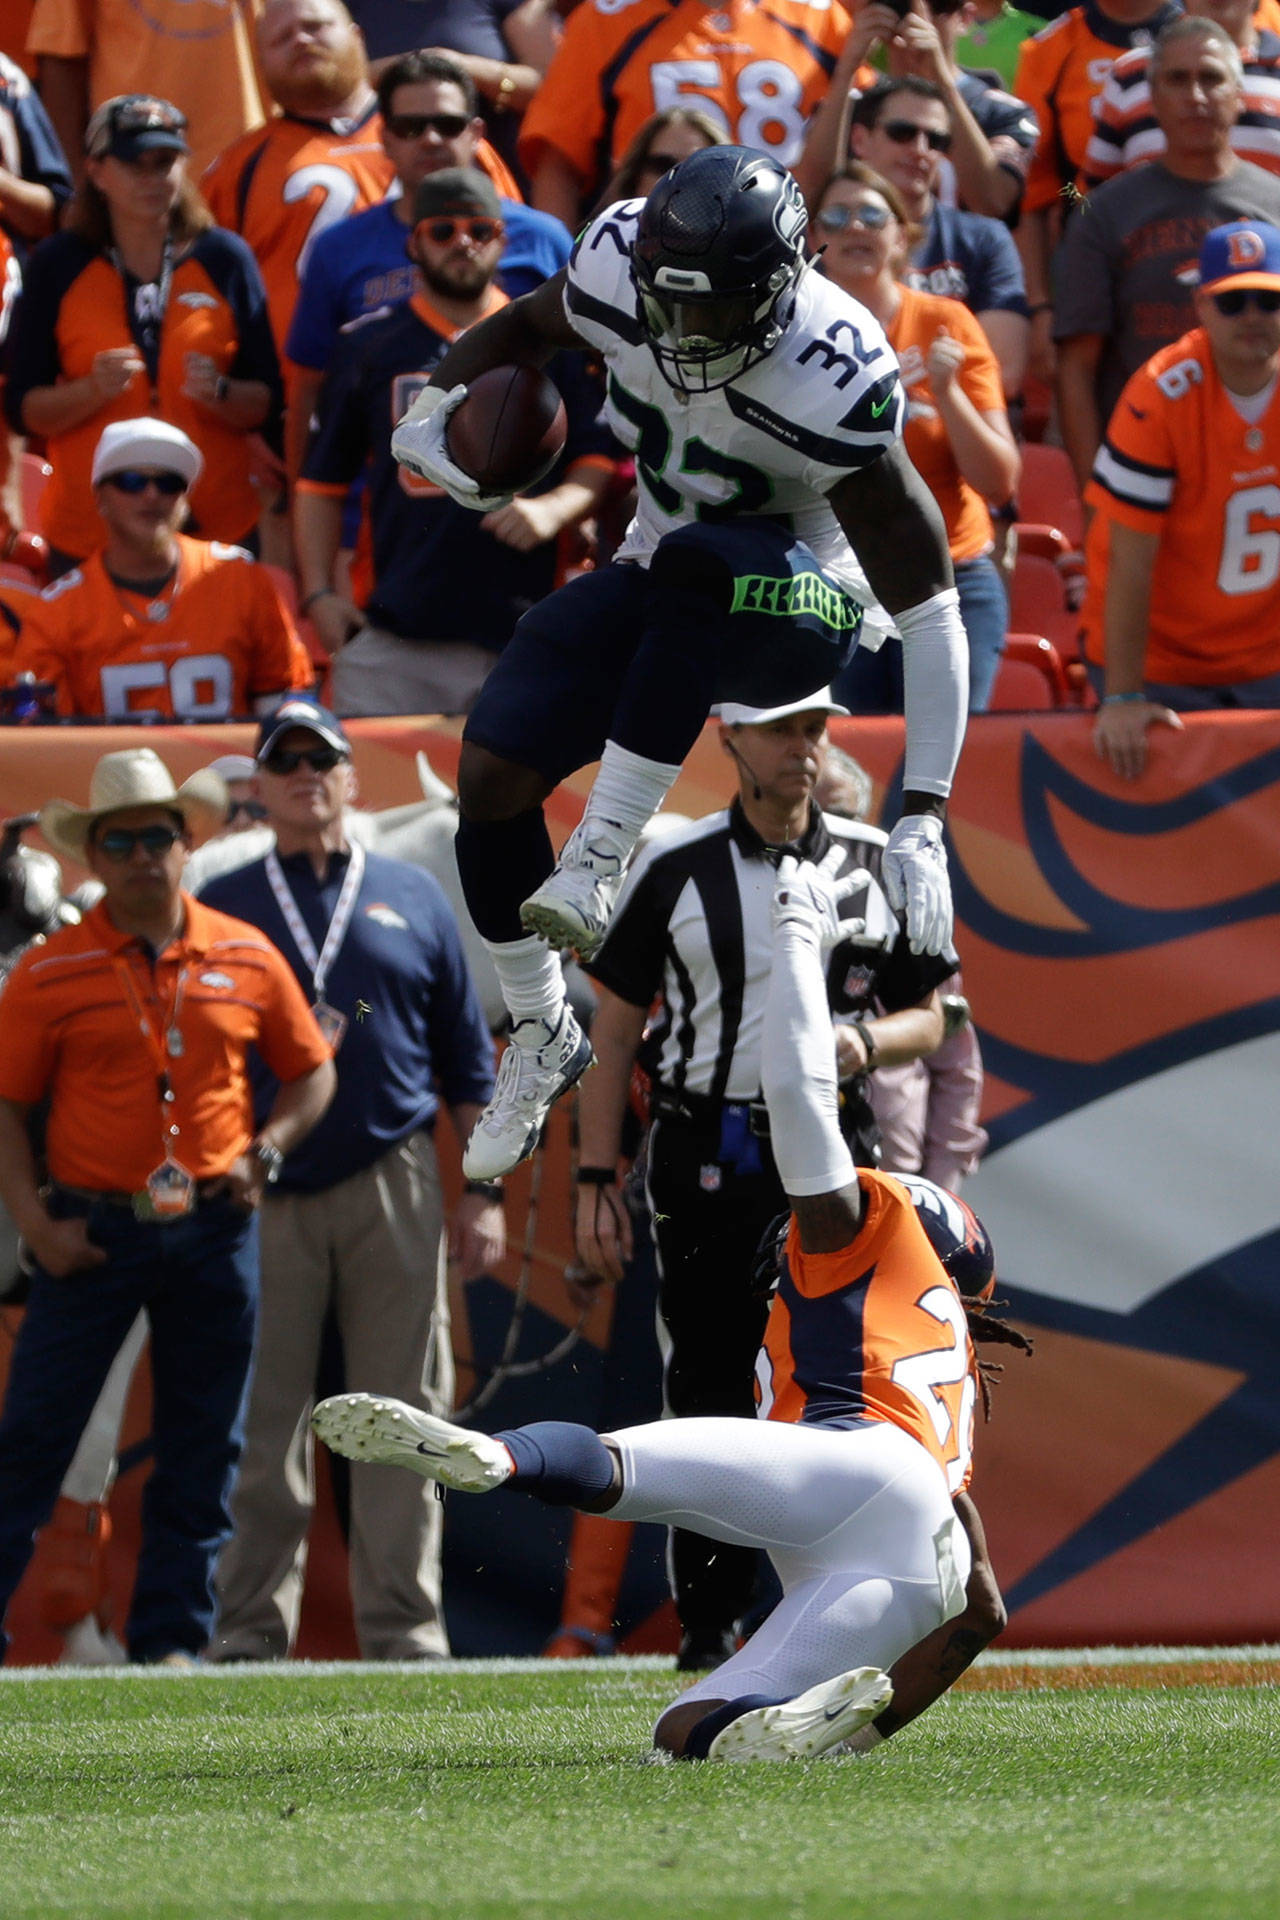 Seattle’s Chris Carson leaps over Denver’s Bradley Roby during the first half of a Sept. 9 game in Denver. (Jack Dempsey / Associated Press)